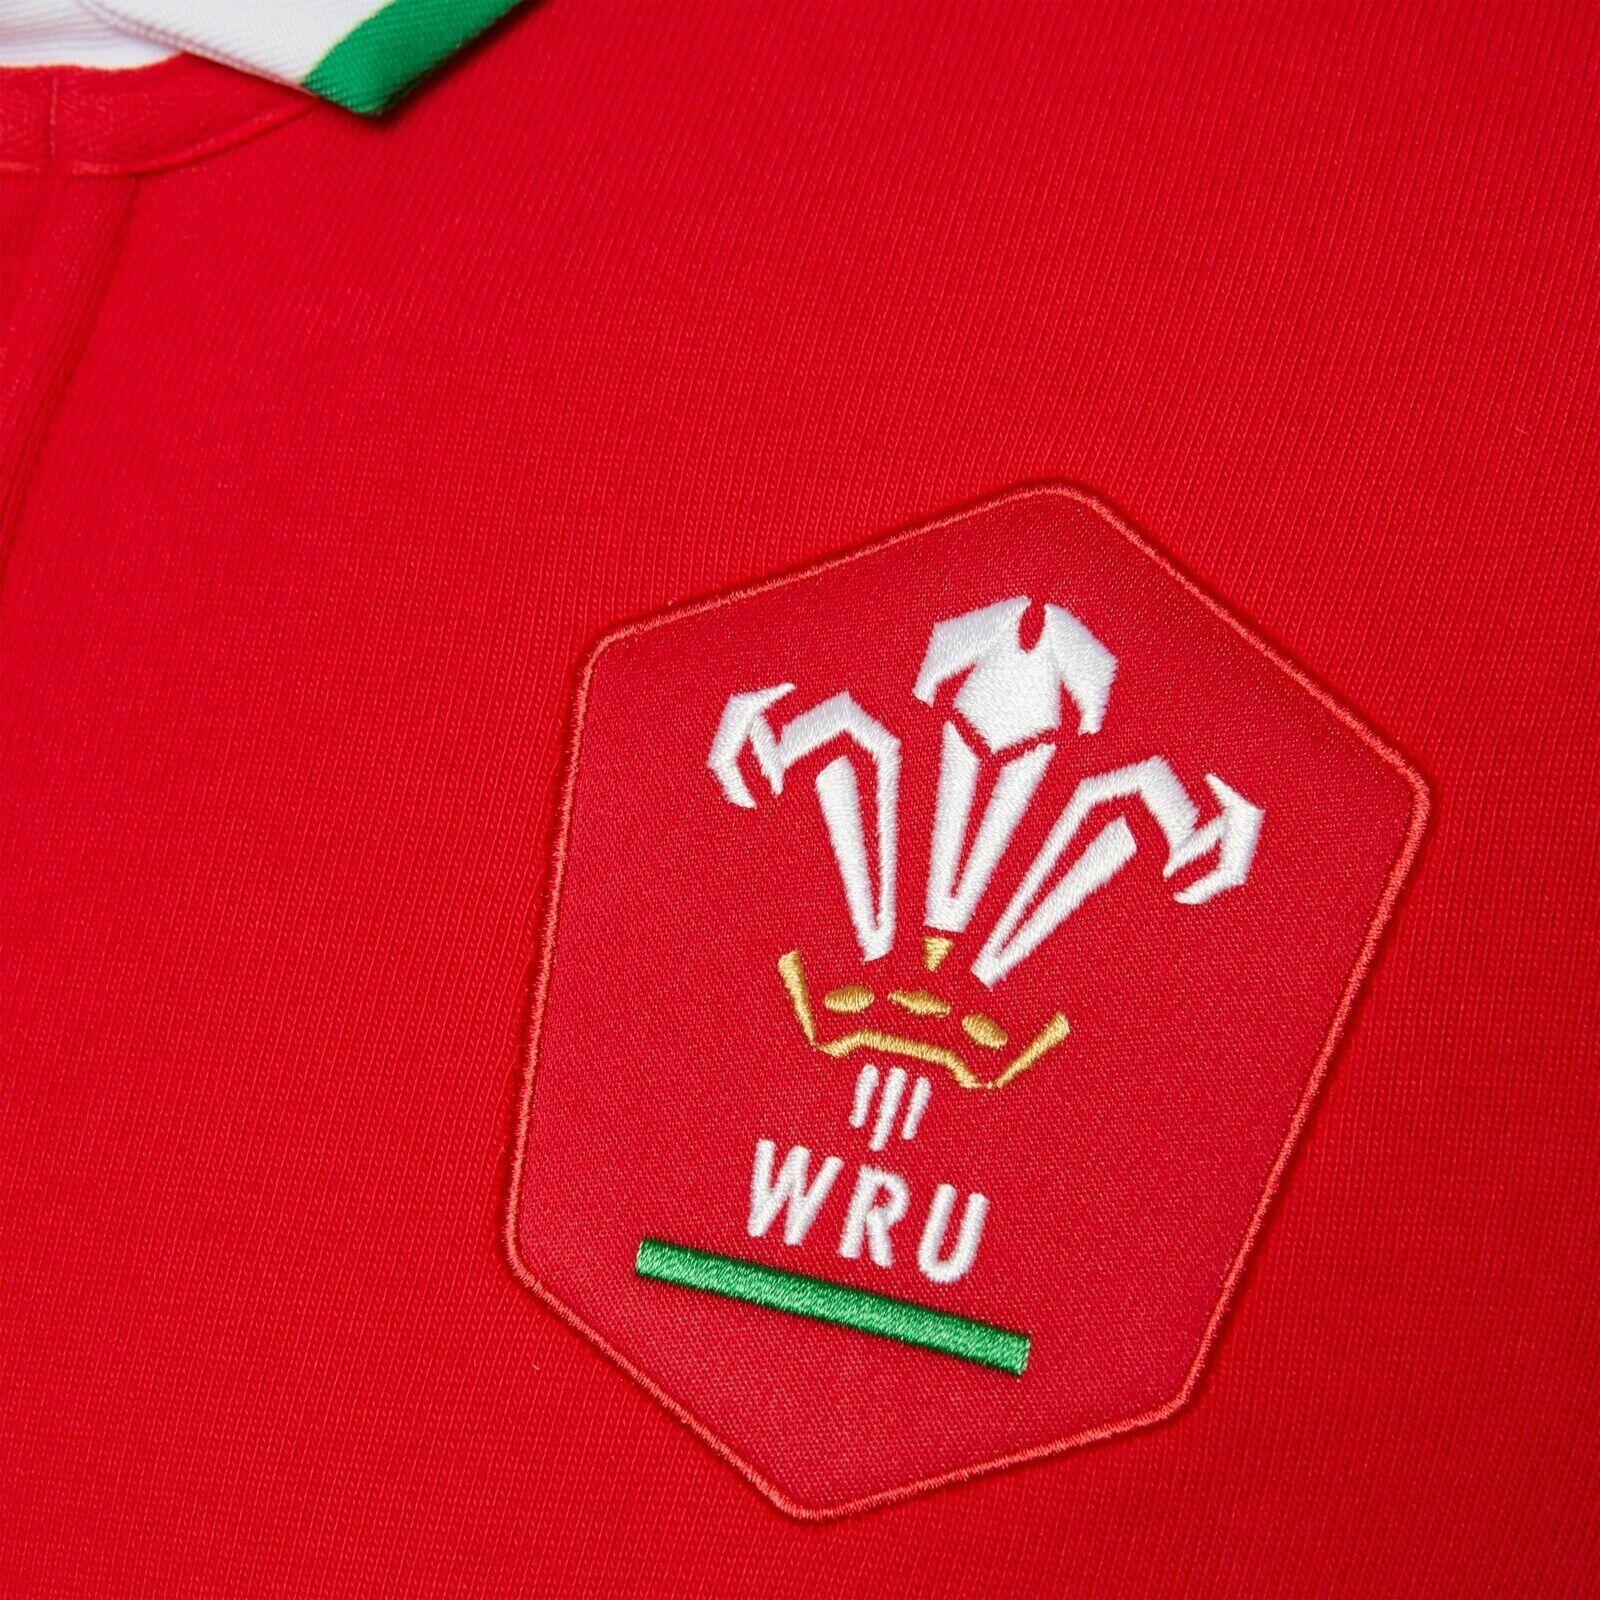 Macron Wales WRU Mens Home Cotton L/S Rugby Shirt 58125449 Red 4/4